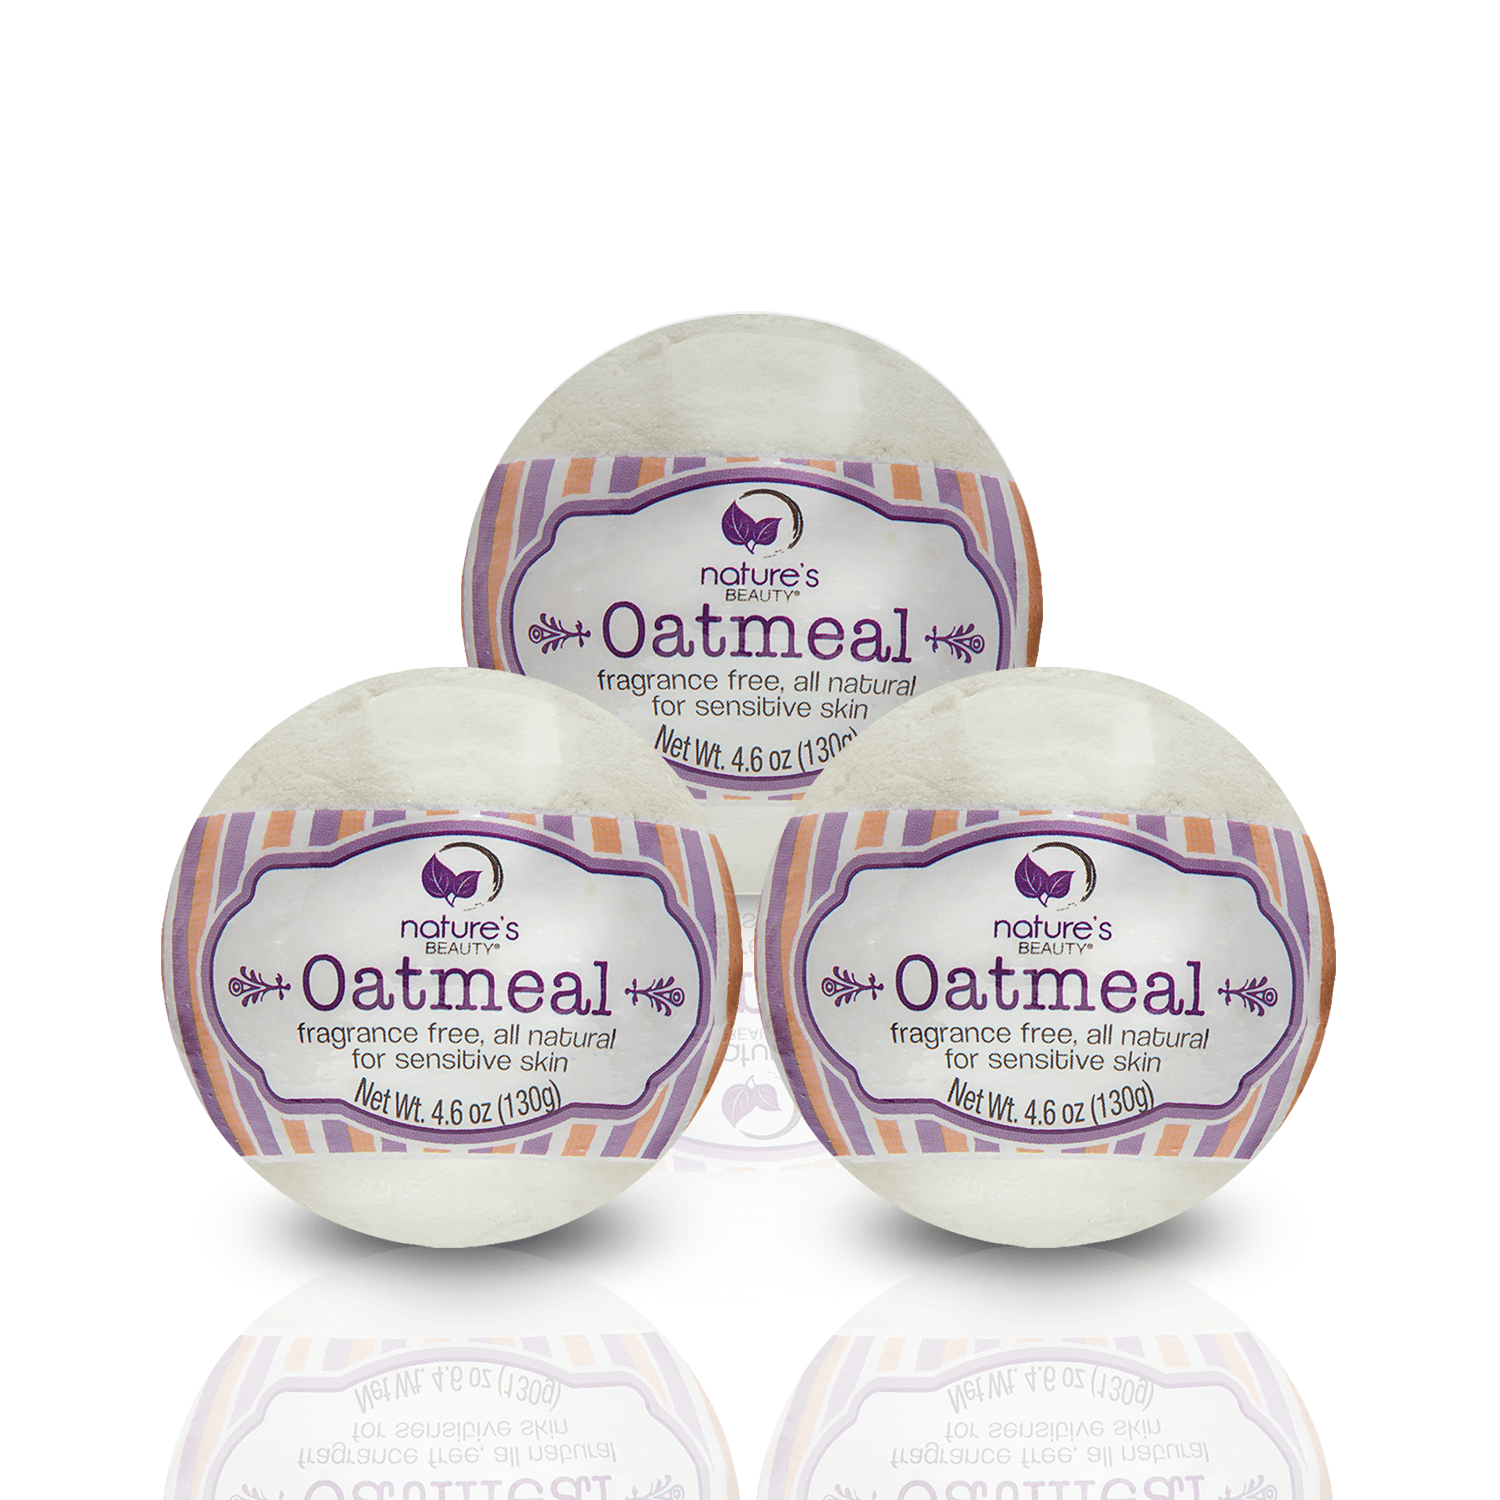 Oatmeal Fragrance-Free Nature's Beauty Body Care Buy 2 Get 1 Free 